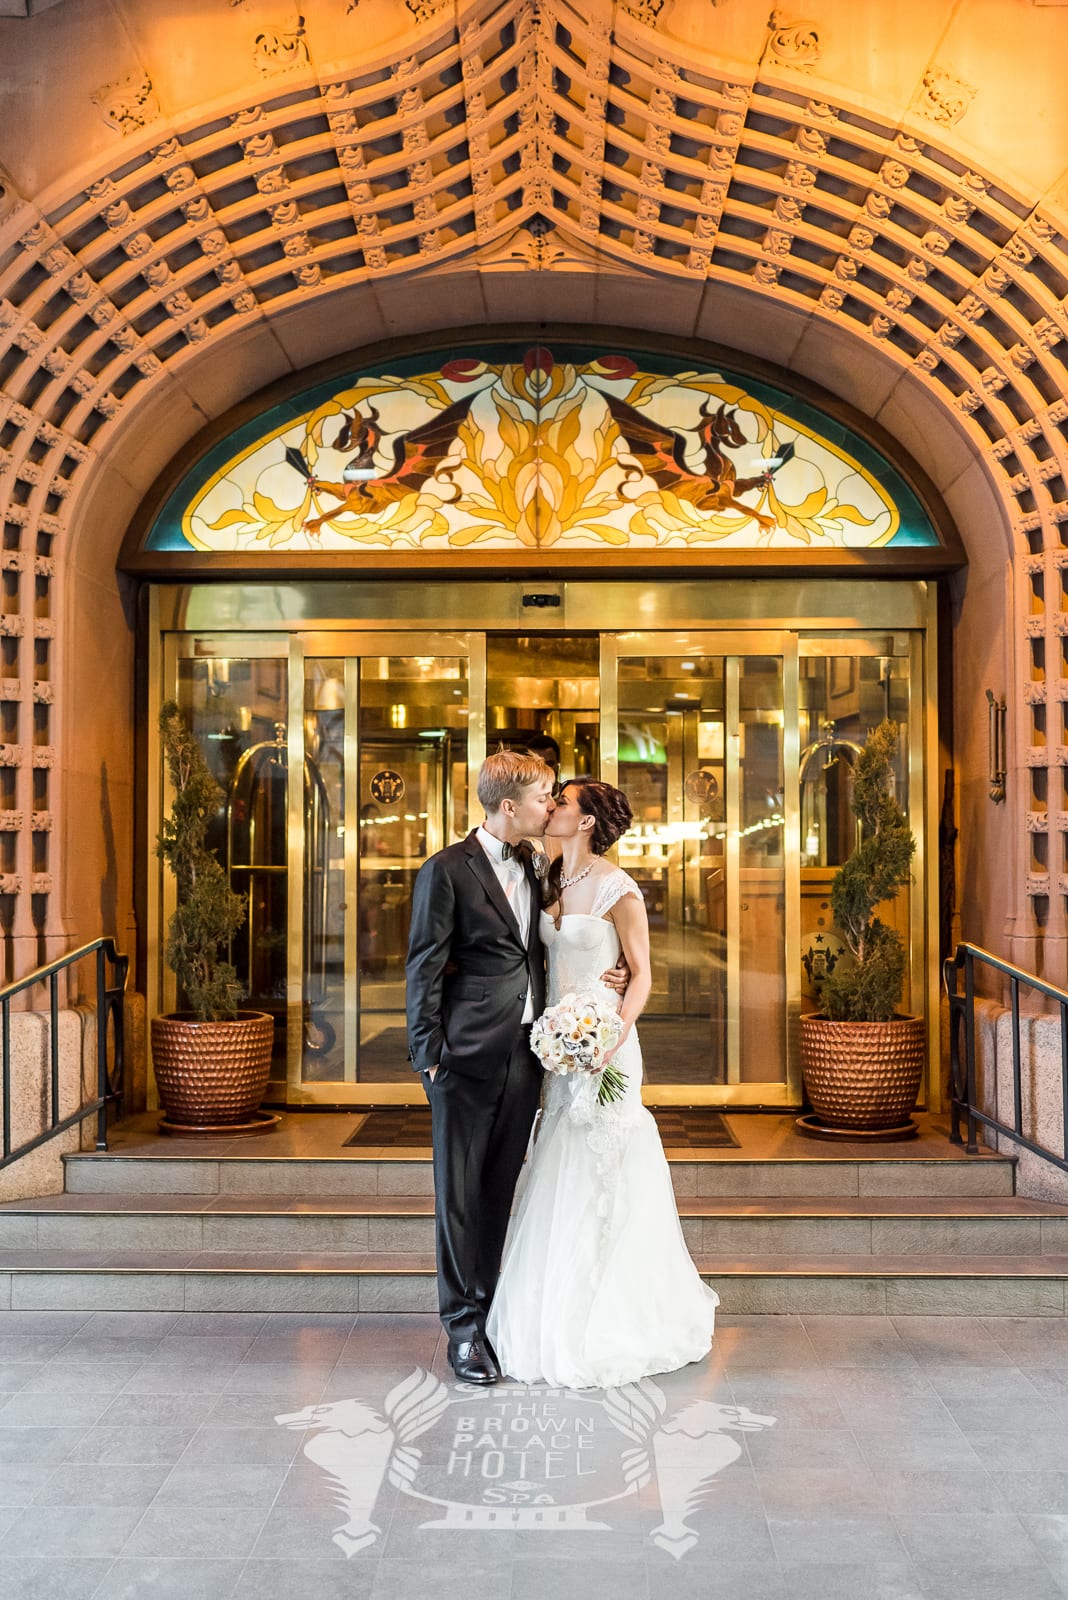 A Dream Denver Wedding | Wedding | Brown Palace Hotel | From the Hip Photo